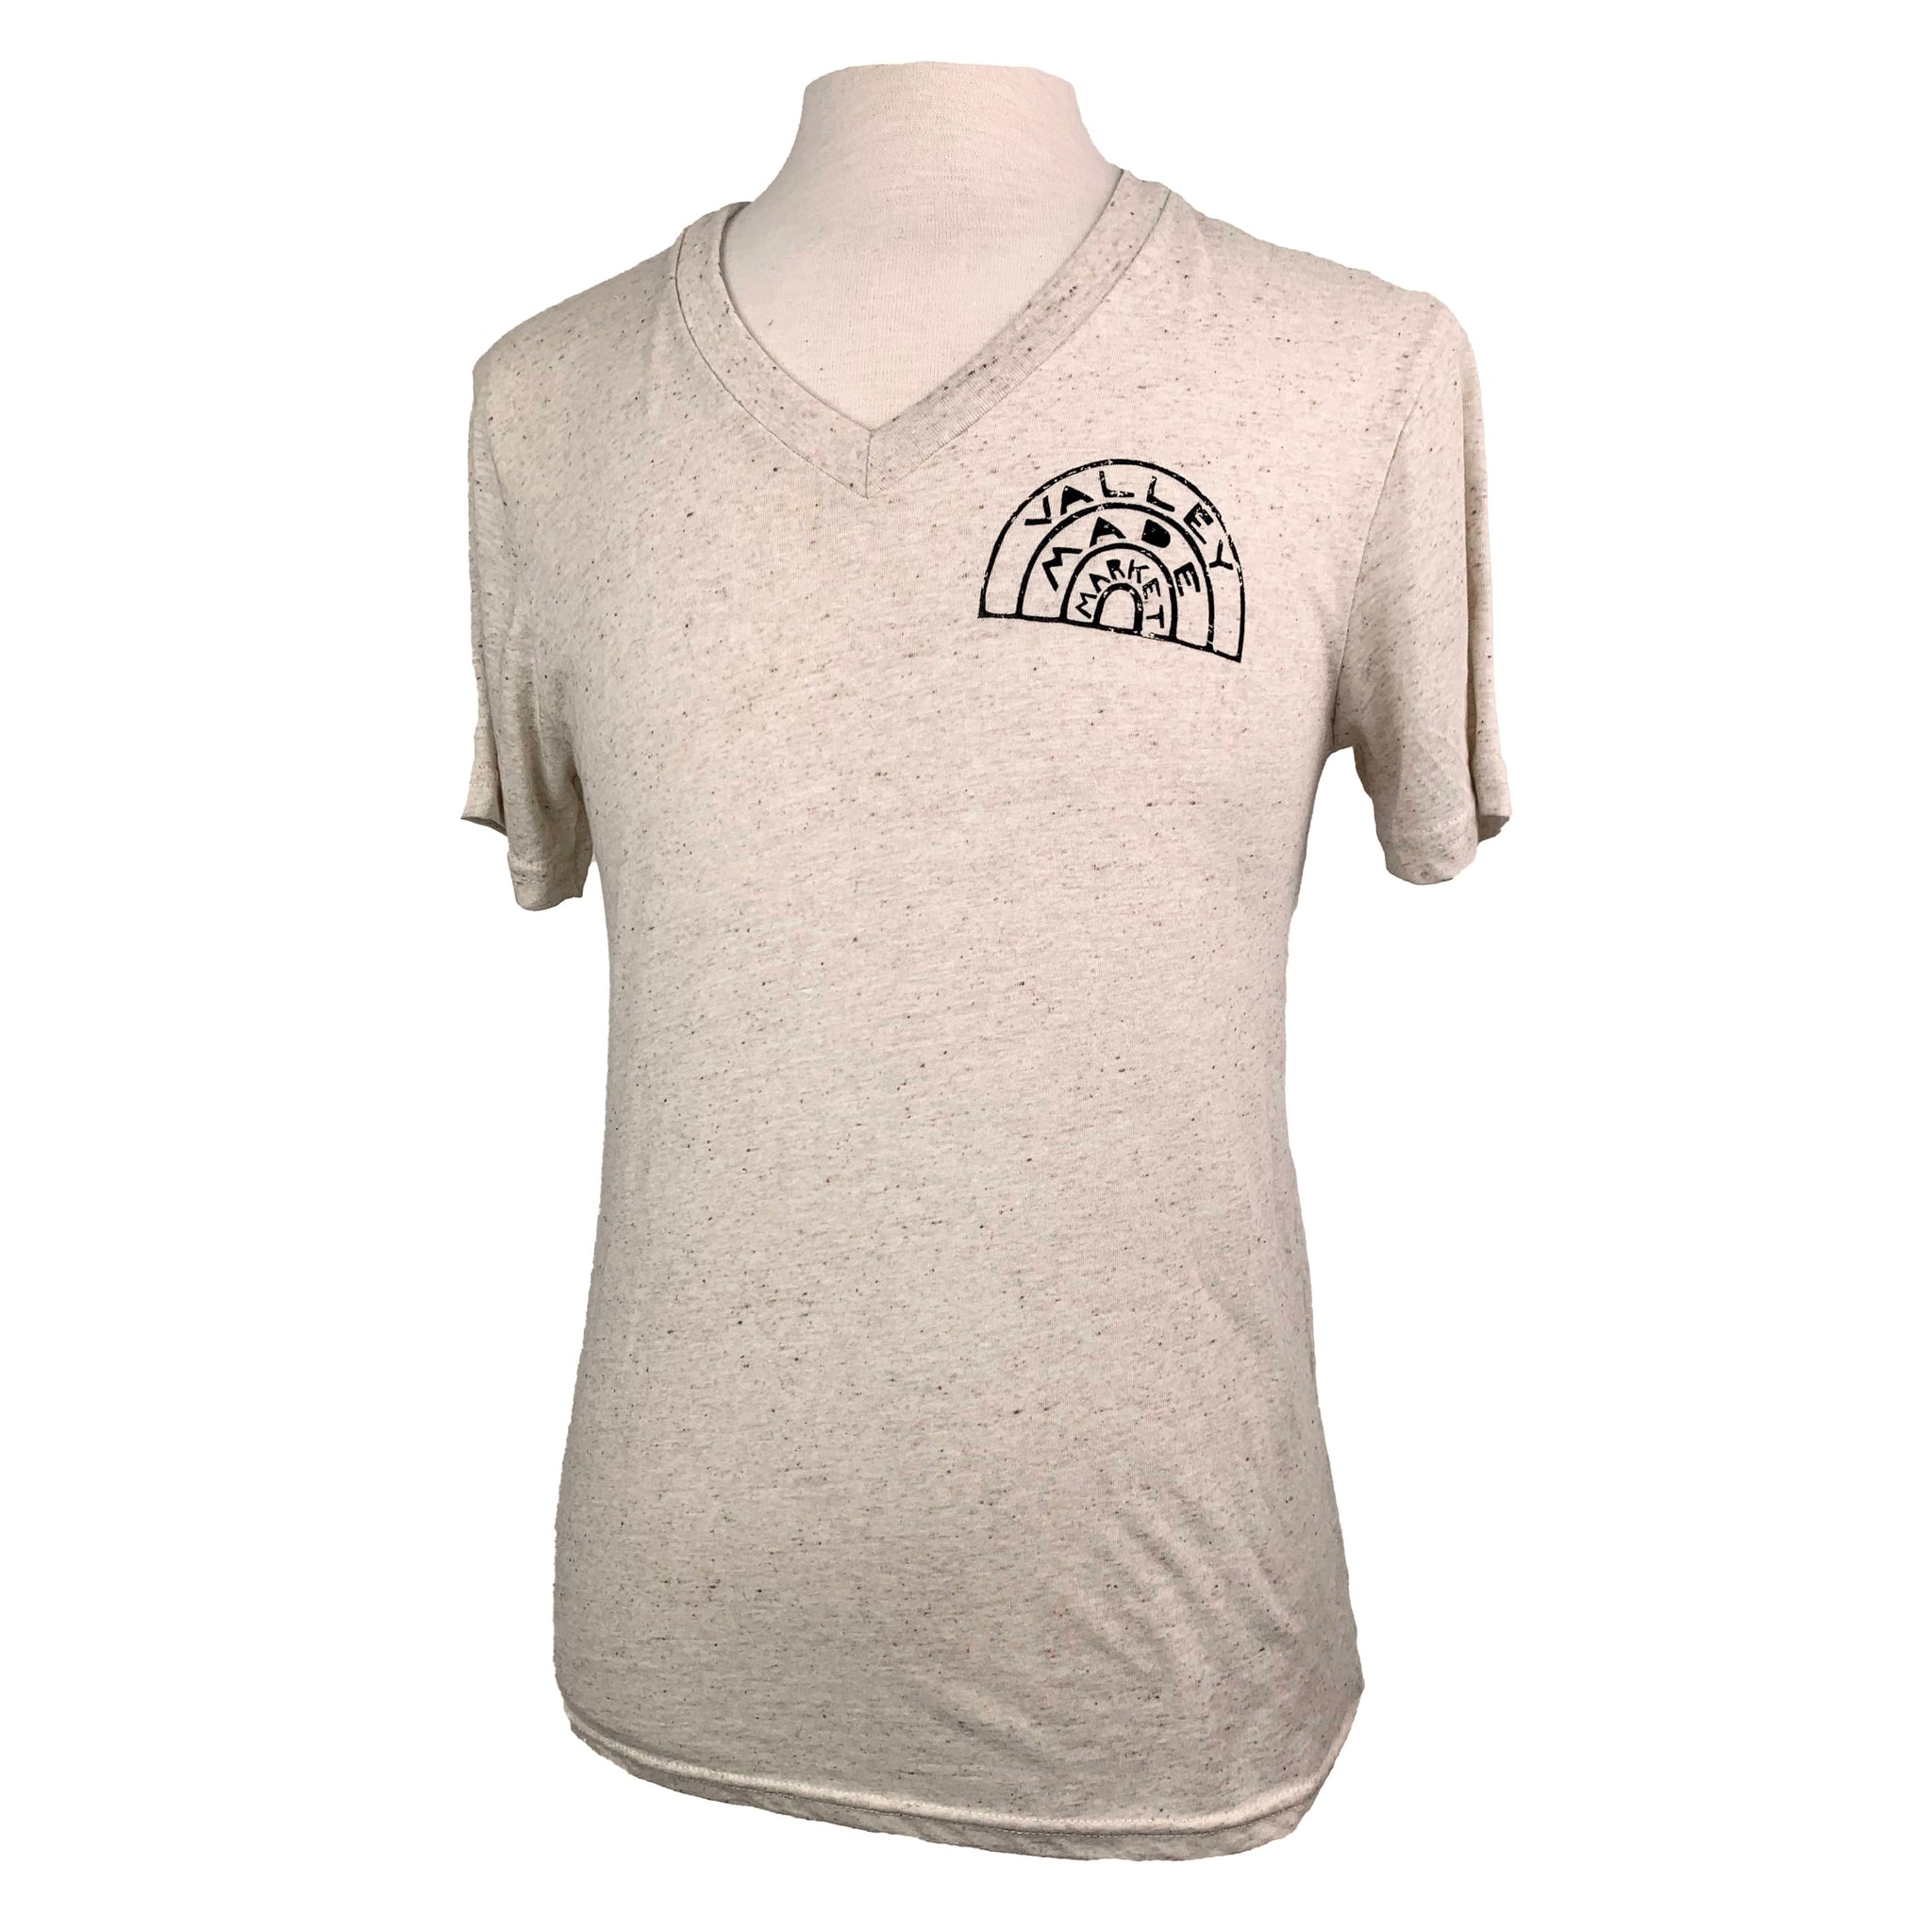 Valley Made Market Unisex V-neck Triblend Tee in Heather Oatmeal